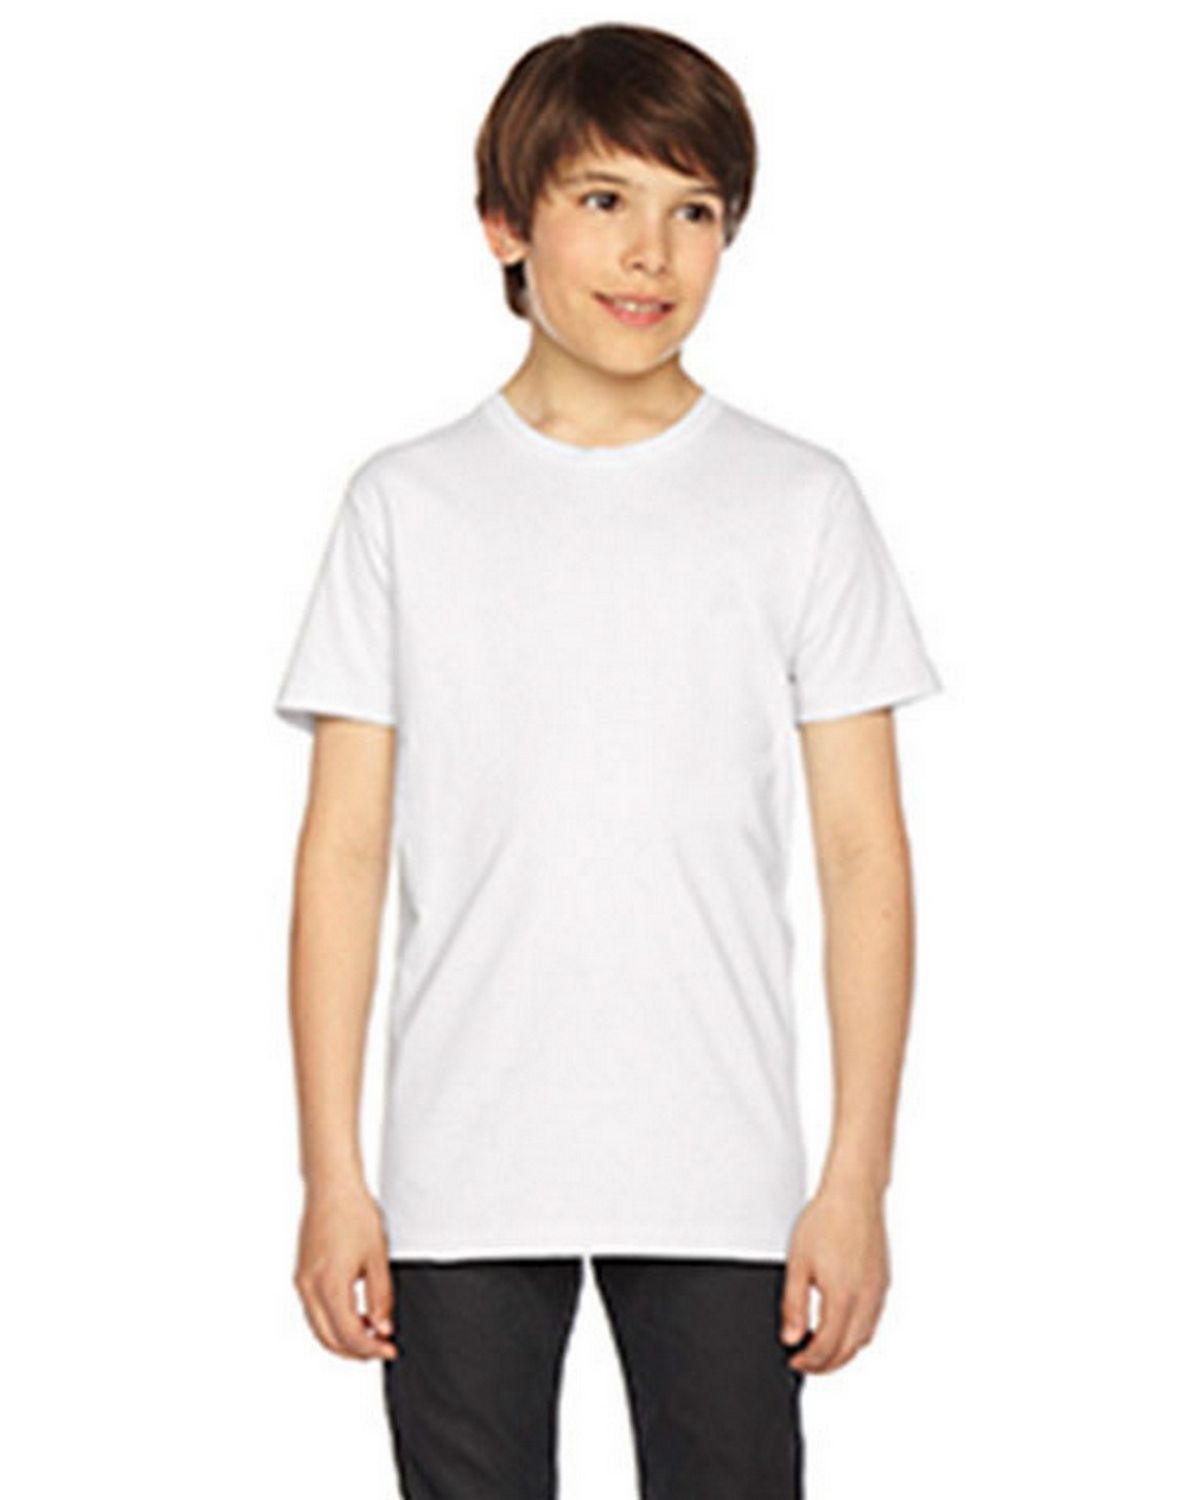 Size Chart for American Apparel 2201W Youth Fine Jersey T-Shirt